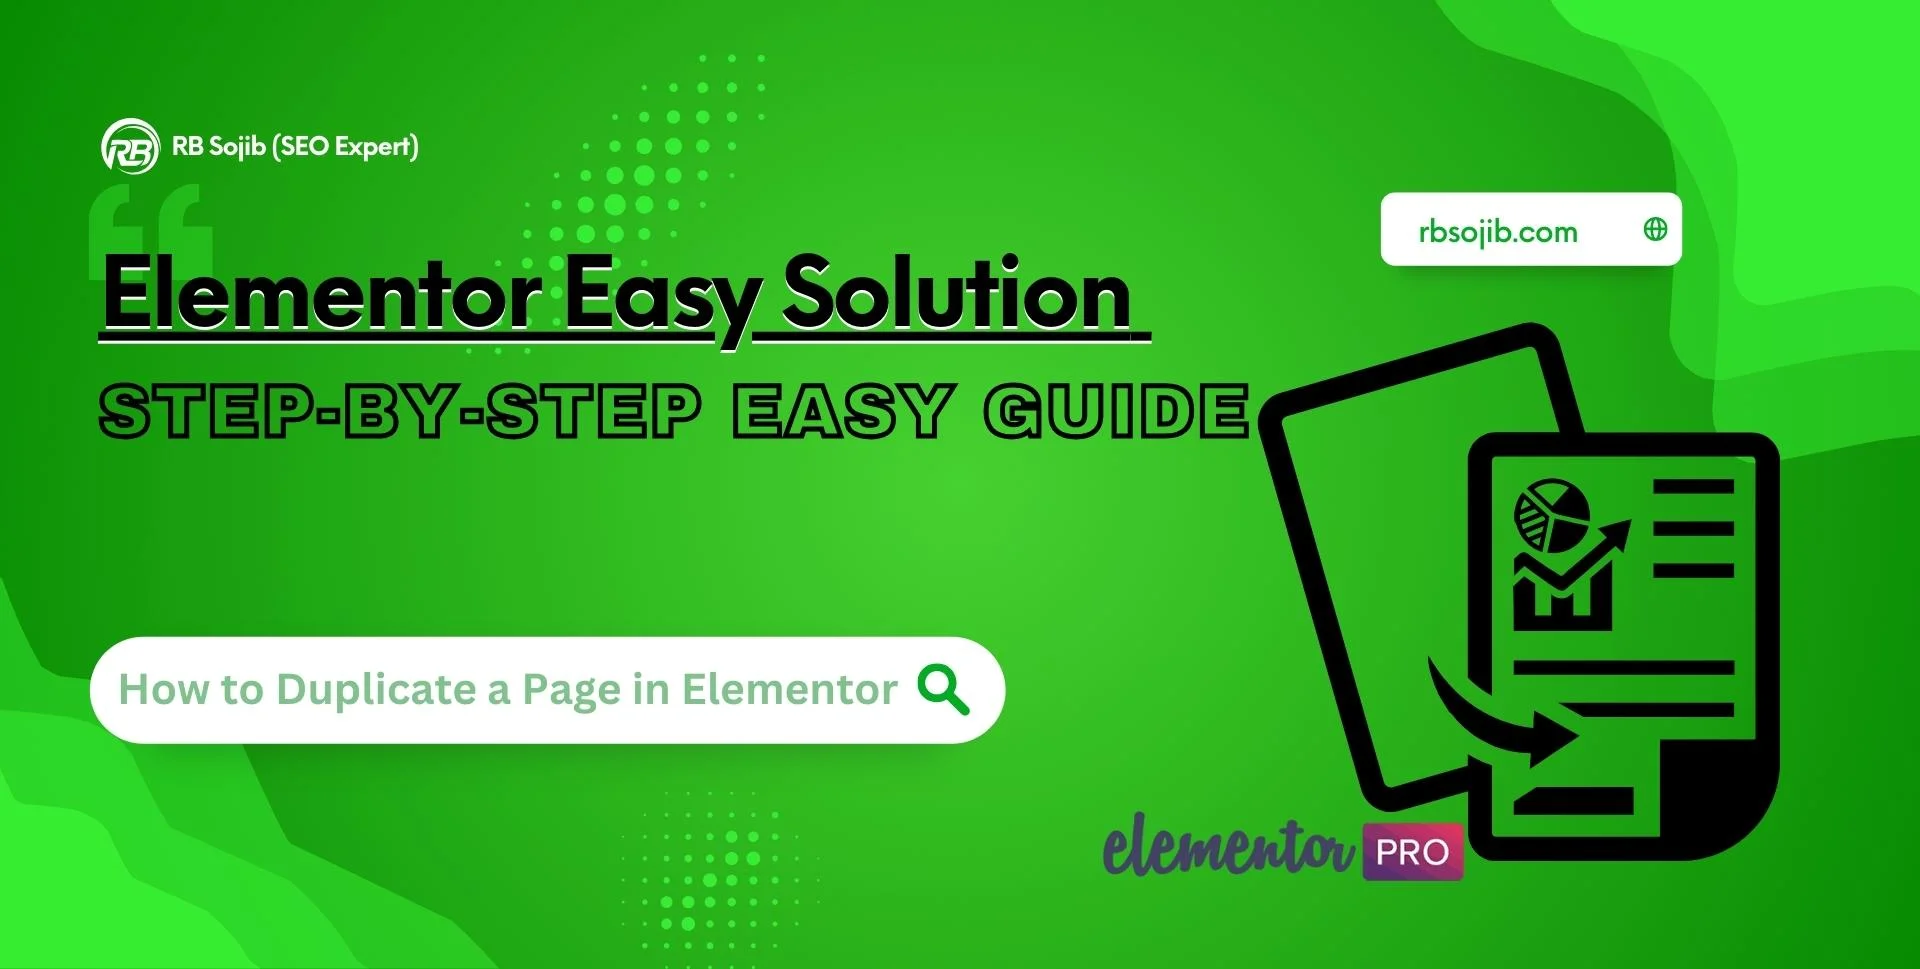 How to Duplicate a Page in Elementor